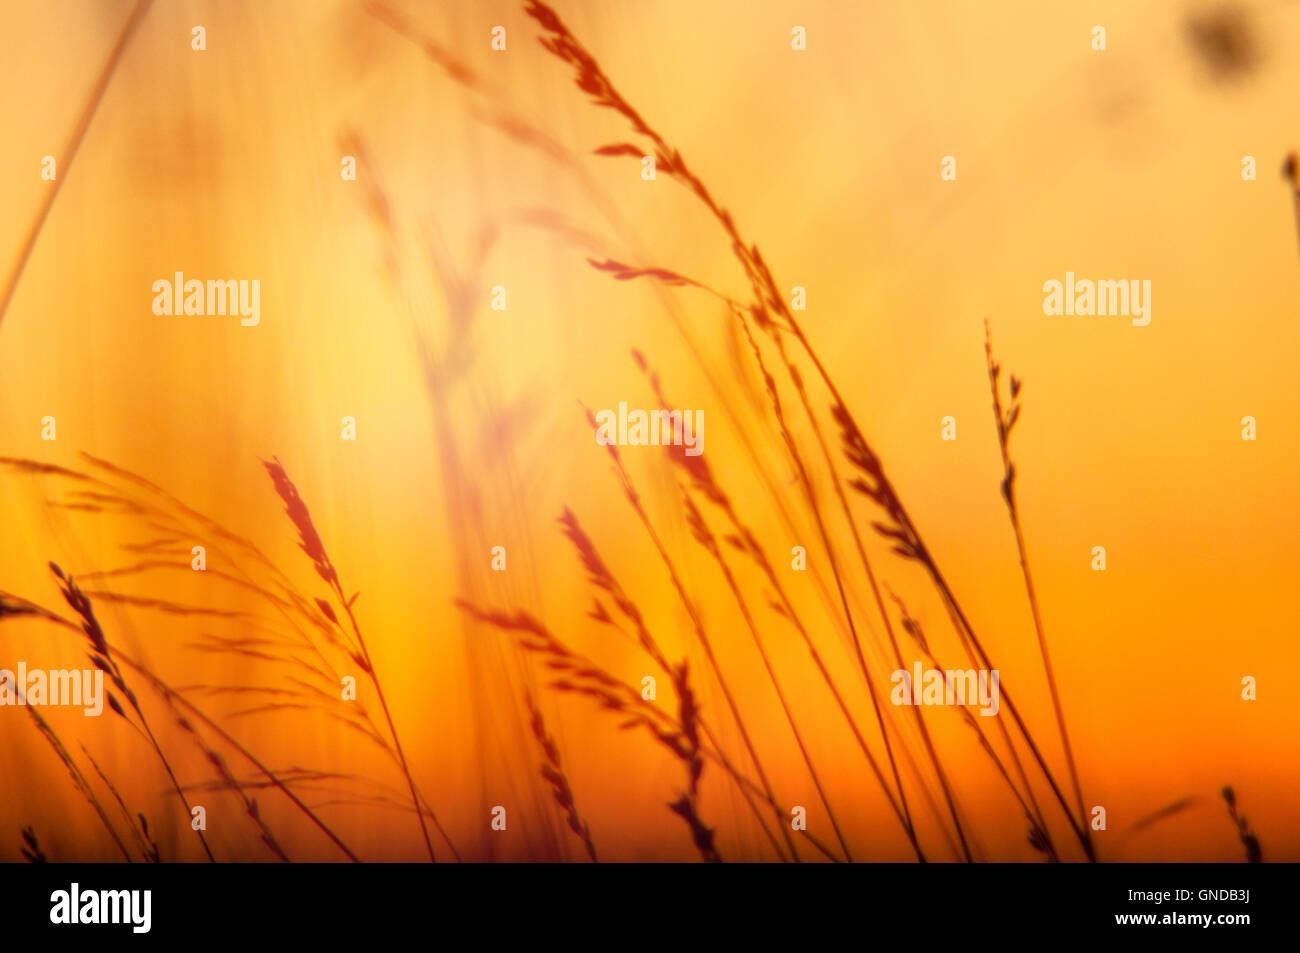 An image of grass silhouette at sunset Stock Photo